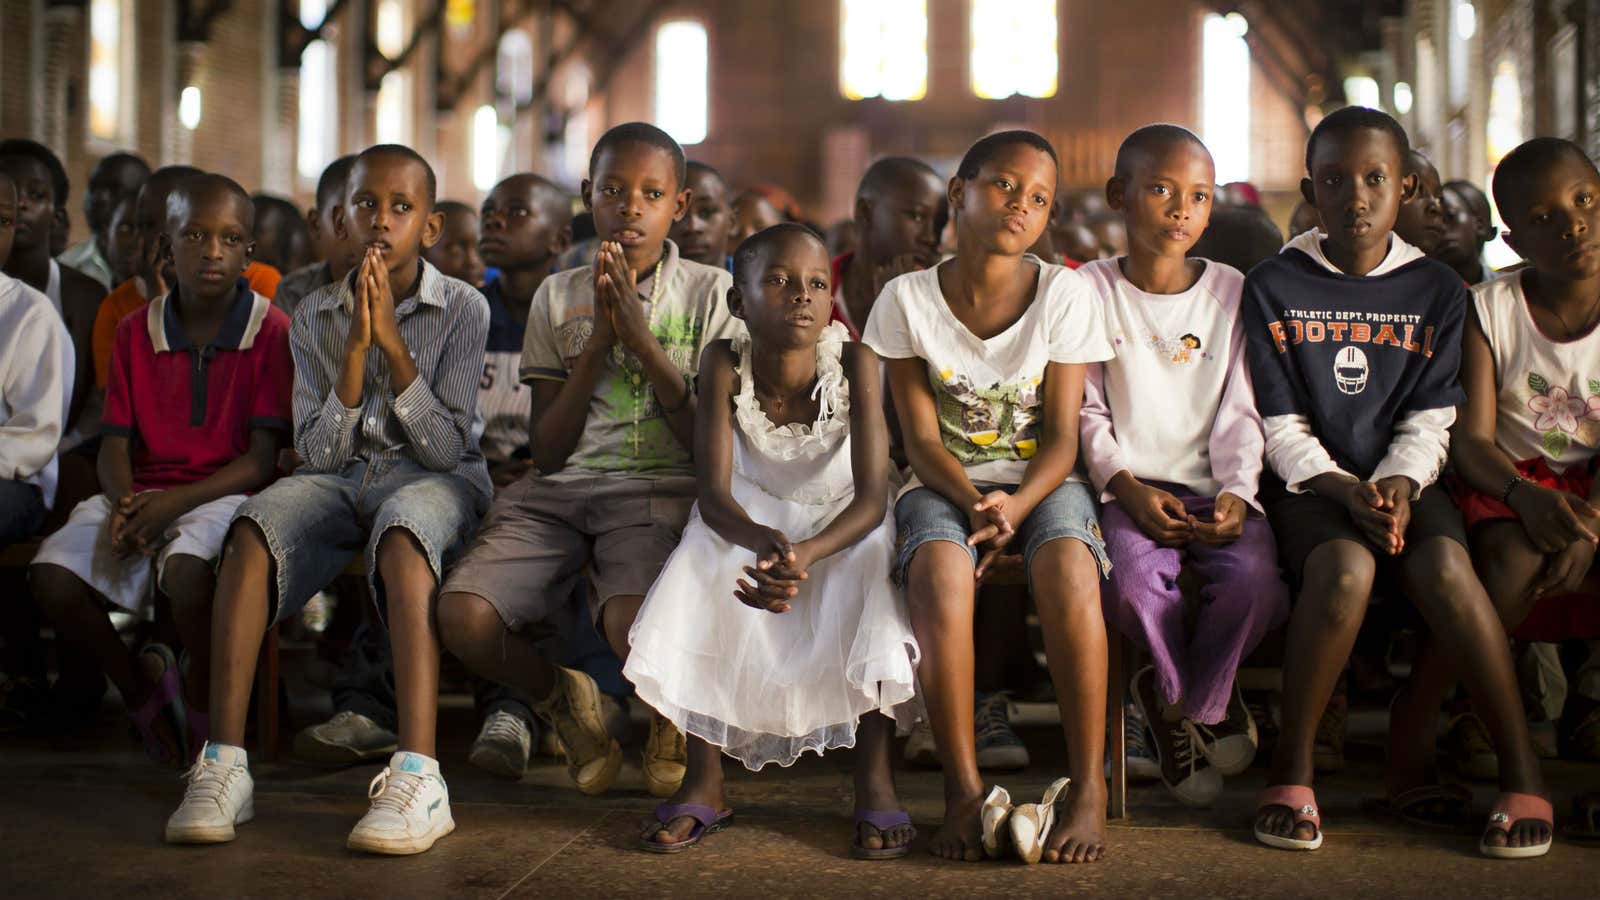 The new generation of Rwanda is bound to have a longer, healthier life.